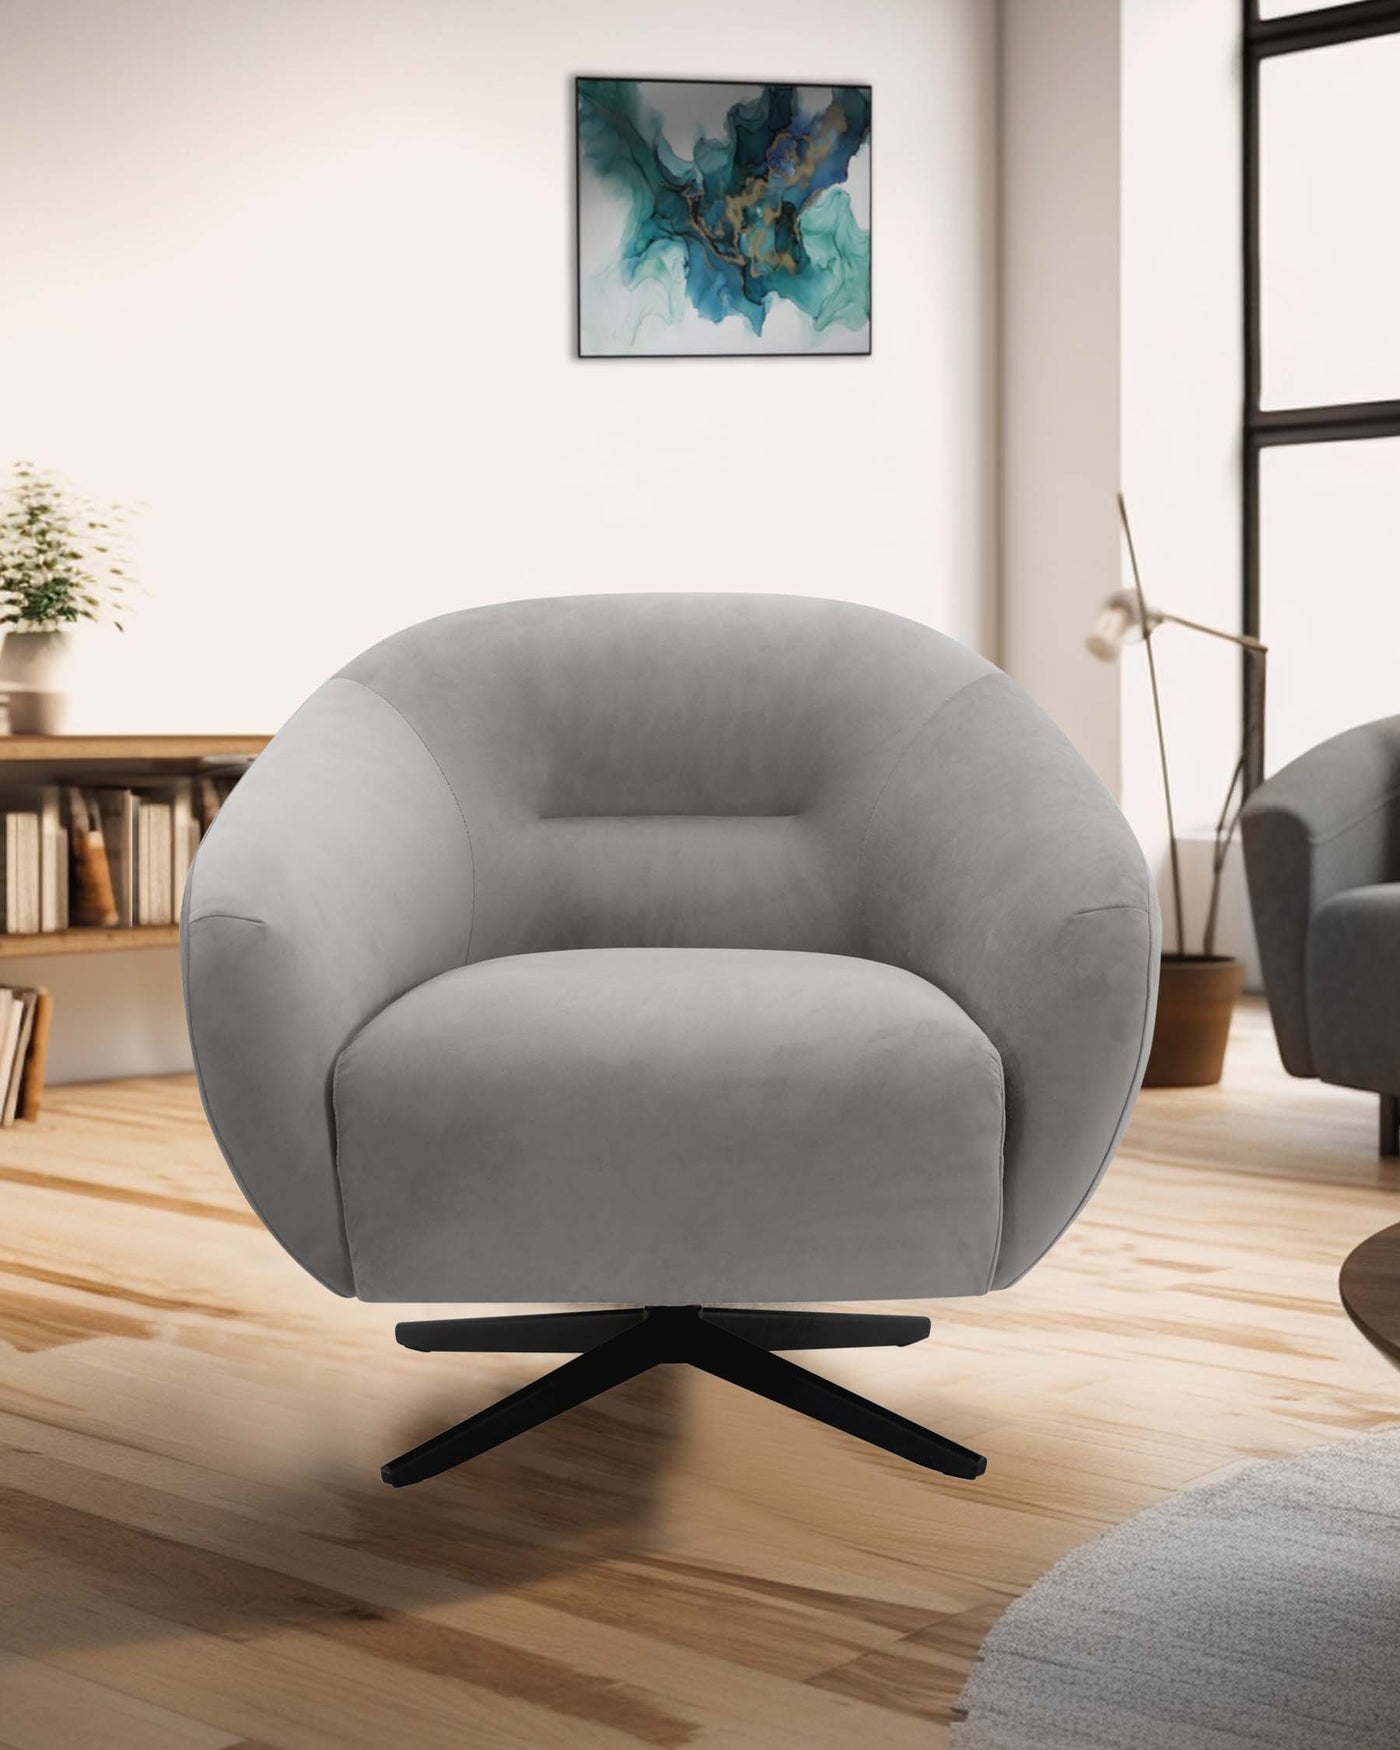 Modern grey swivel armchair with a plush, rounded design, and a sleek, black, star-shaped base, displayed in a contemporary living room setting with natural light.